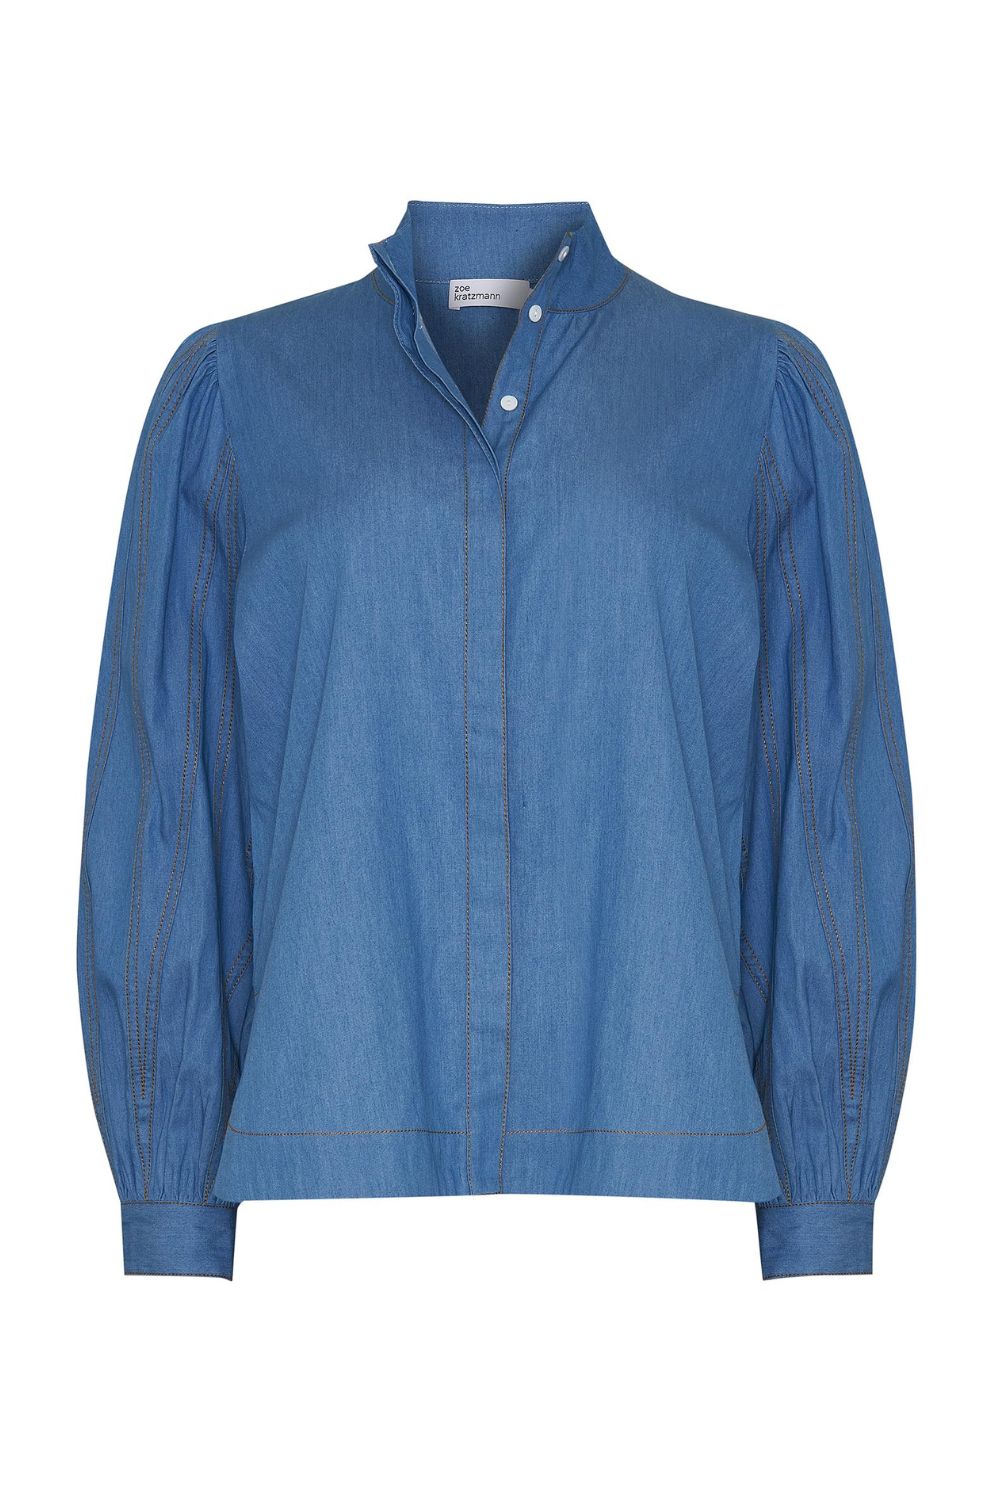 oblige top - mid chambray